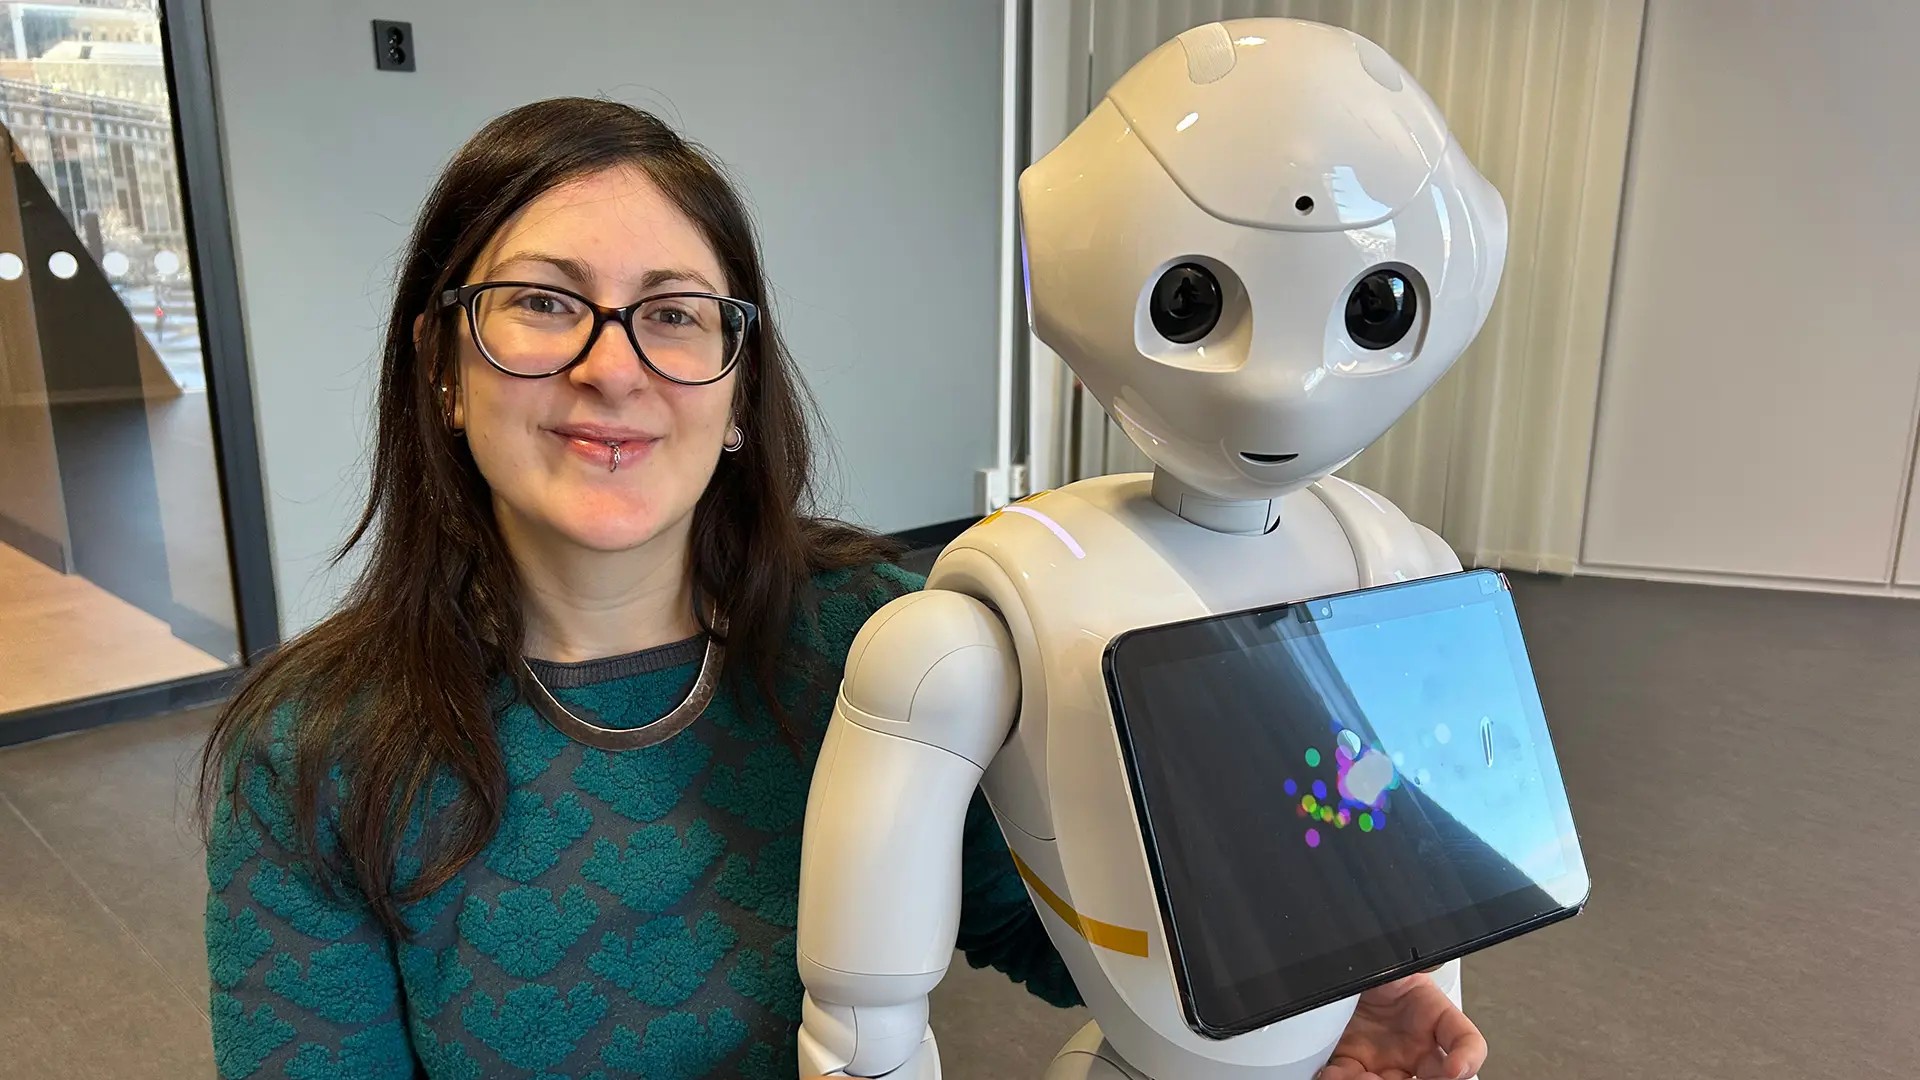 Ilaria Torre with the robot Pepper